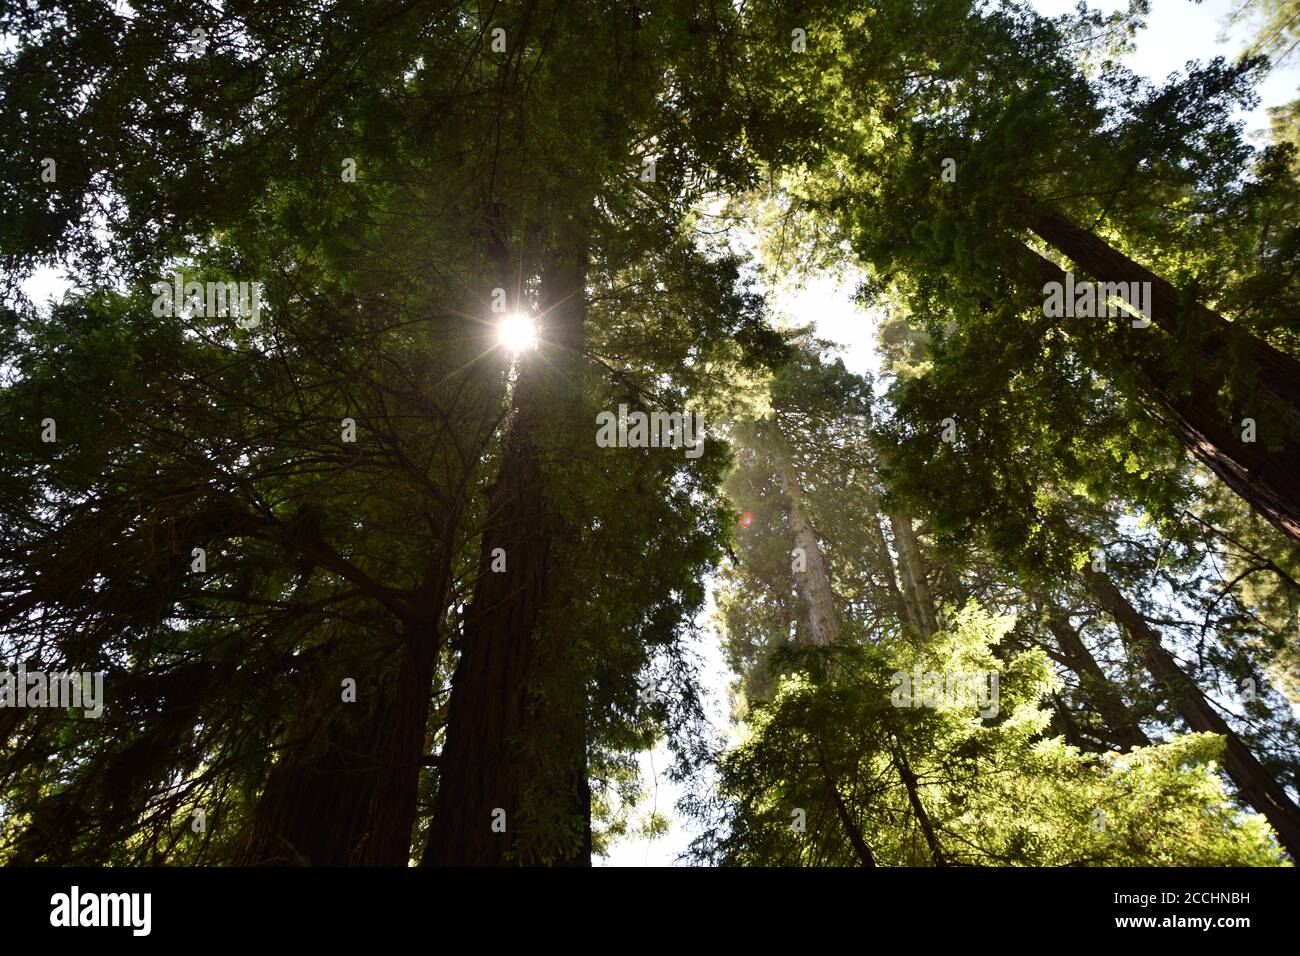 The sun shining through leaves of redwood in Muir woods national park outside San Francisco Stock Photo